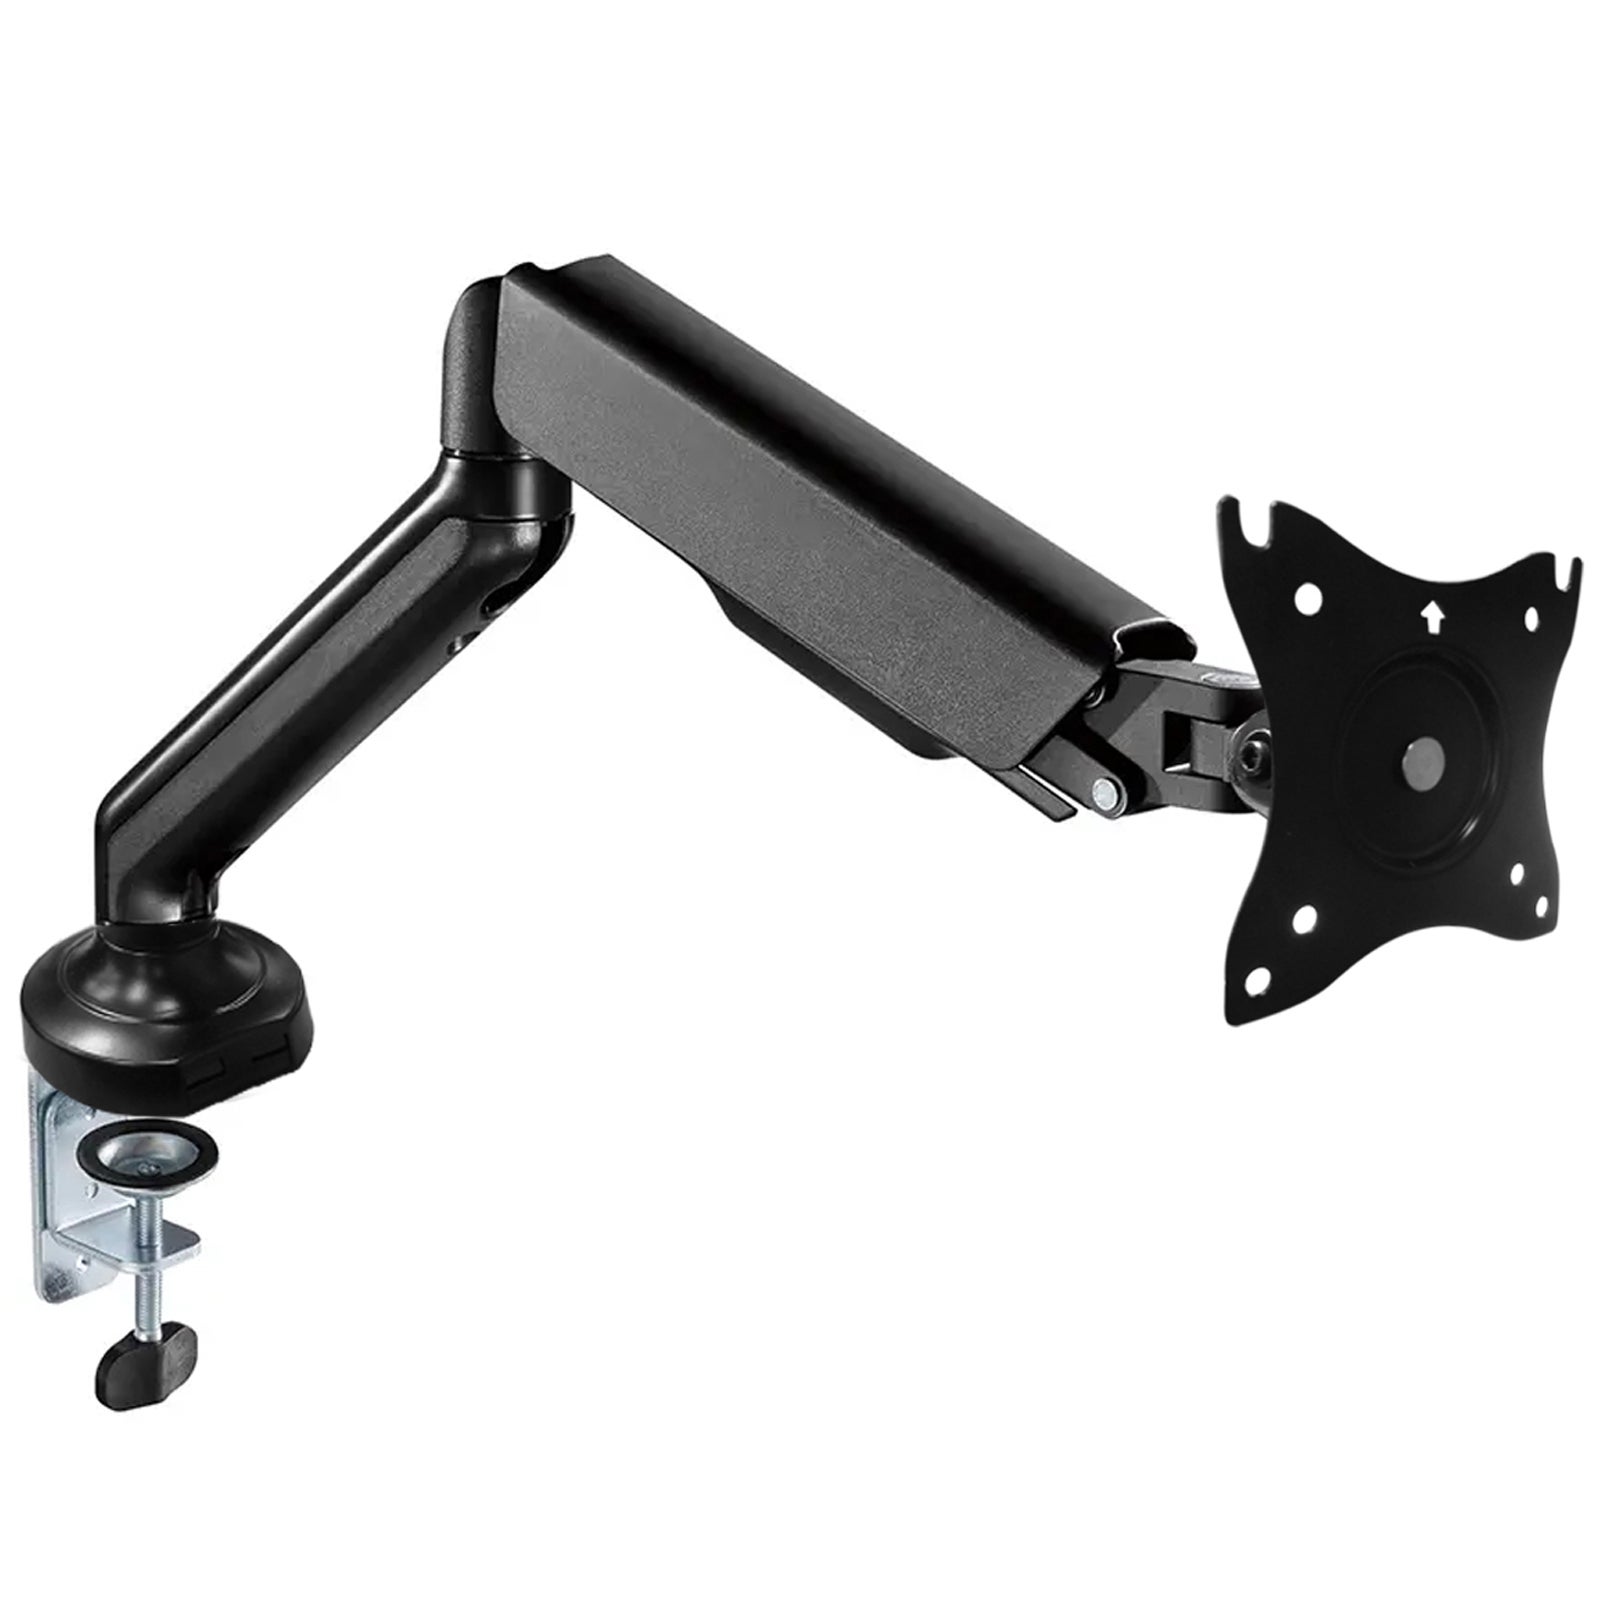 TODO Gas Spring Monitor Mount Desk Clamp Stand Bracket VESA 75-100mm up to 27 inch